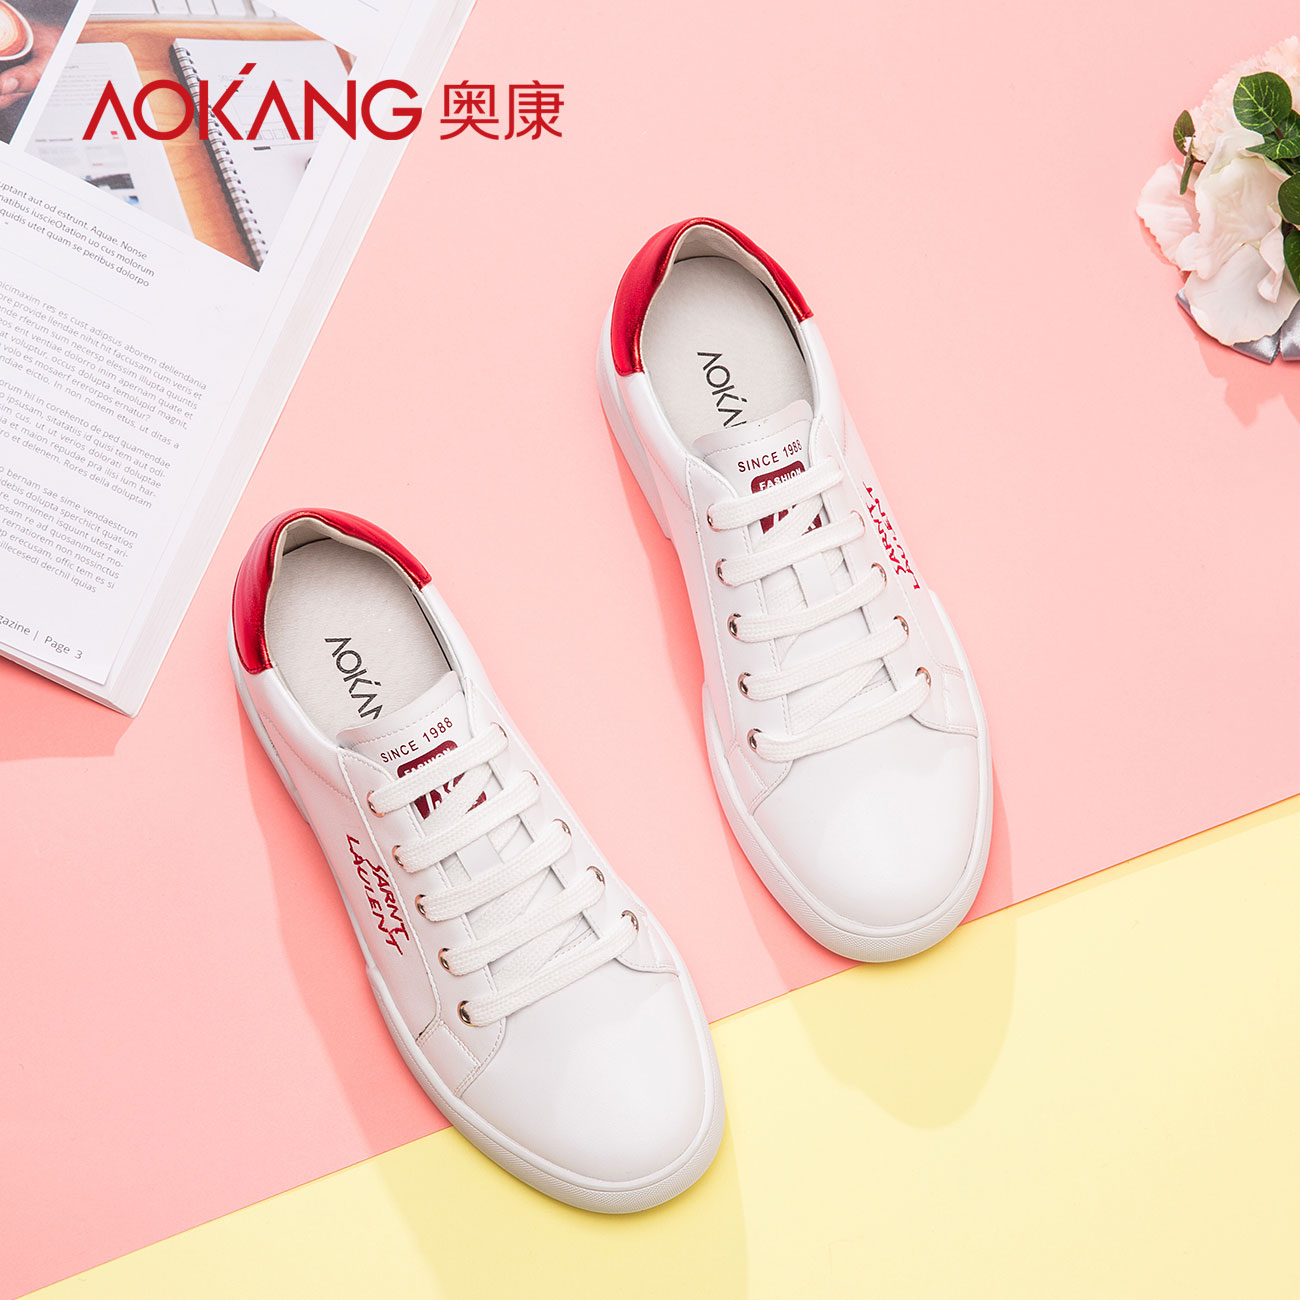 Aokang Women's Shoes Small White Shoes College Fashion Shoes with Wind Laces and Low-Up Women's Single Shoes